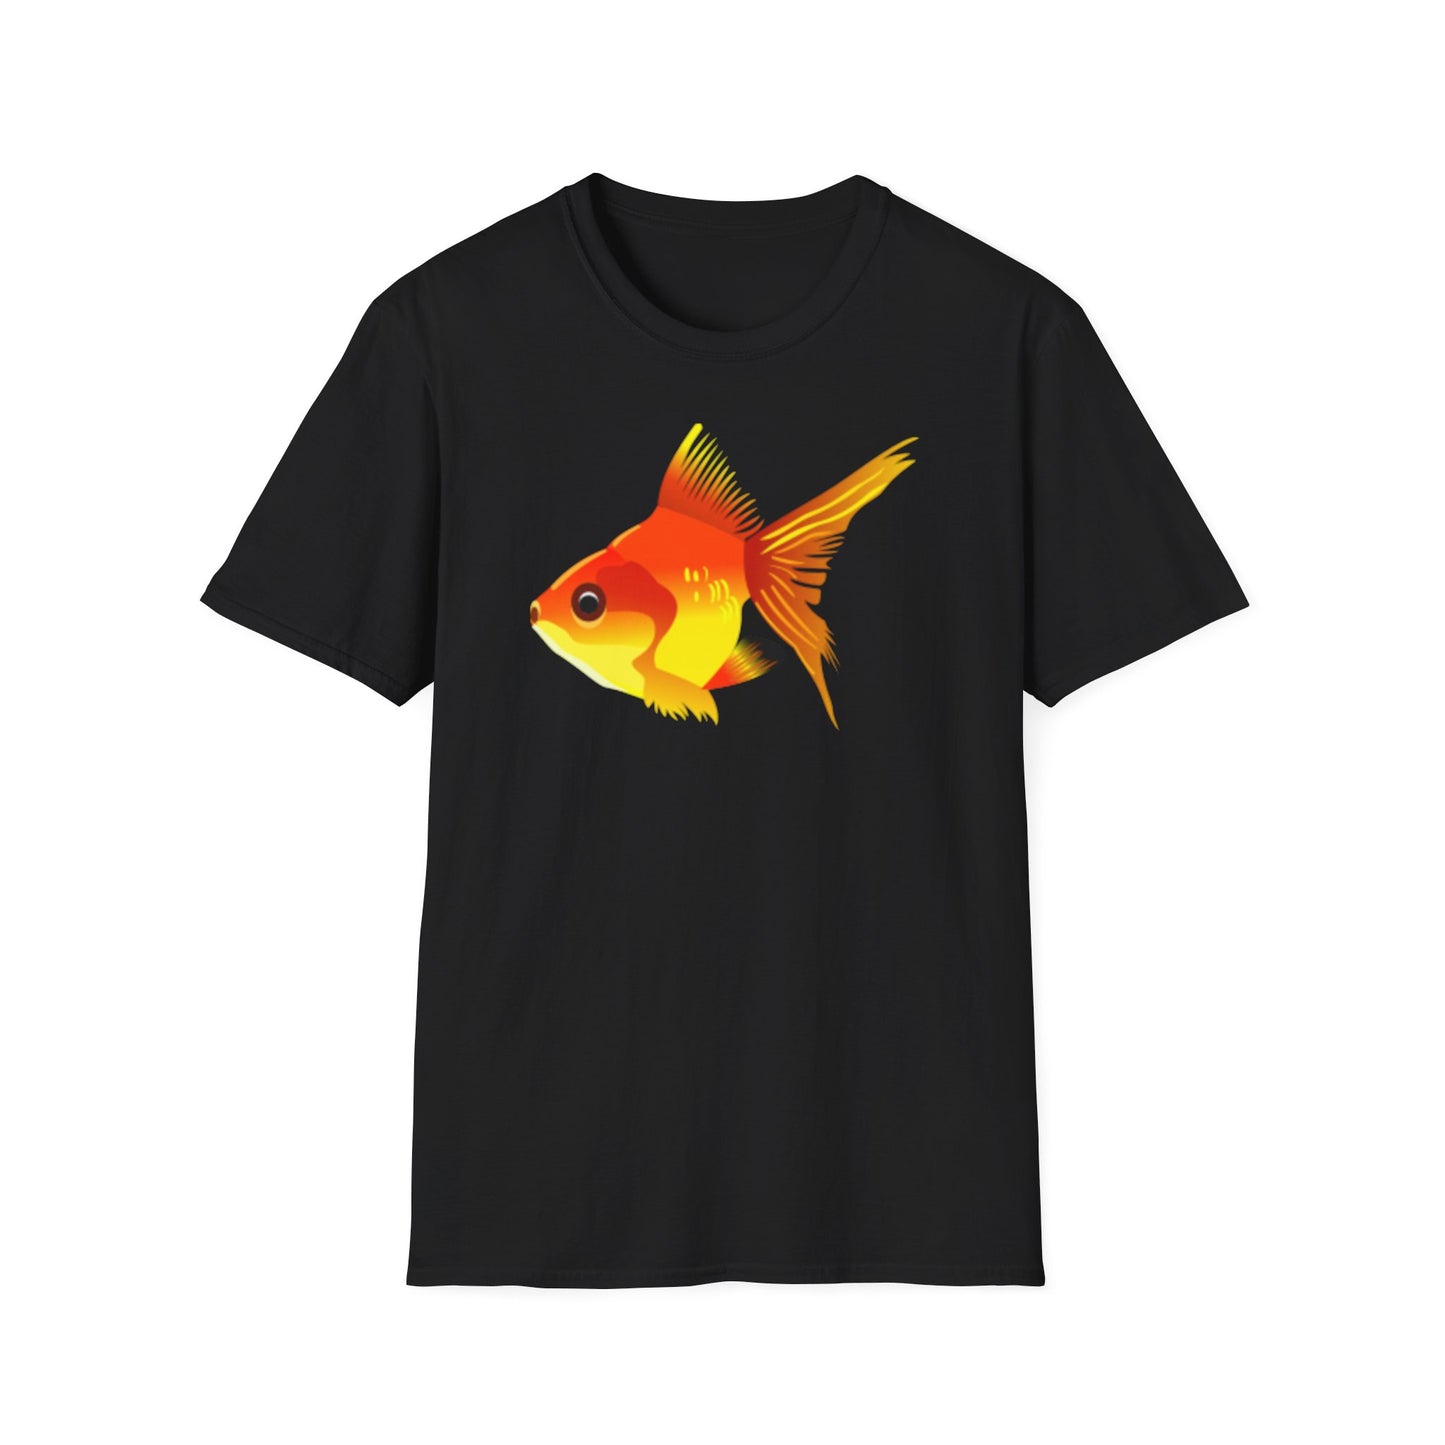 A black t-shirt with a design of a bright orange goldfish